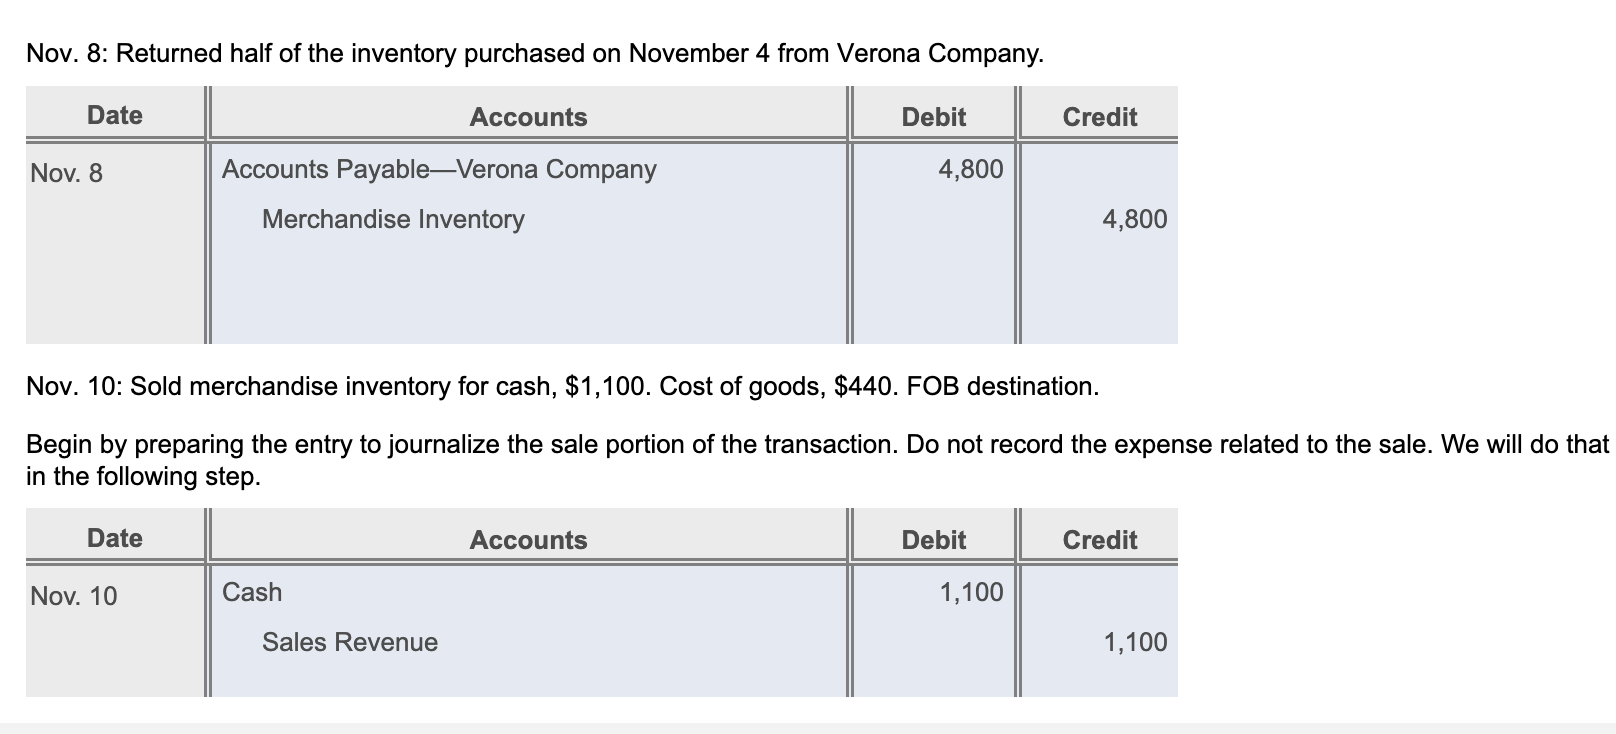 Solved Nov. 6: Paid freight bill of $160 on November 4